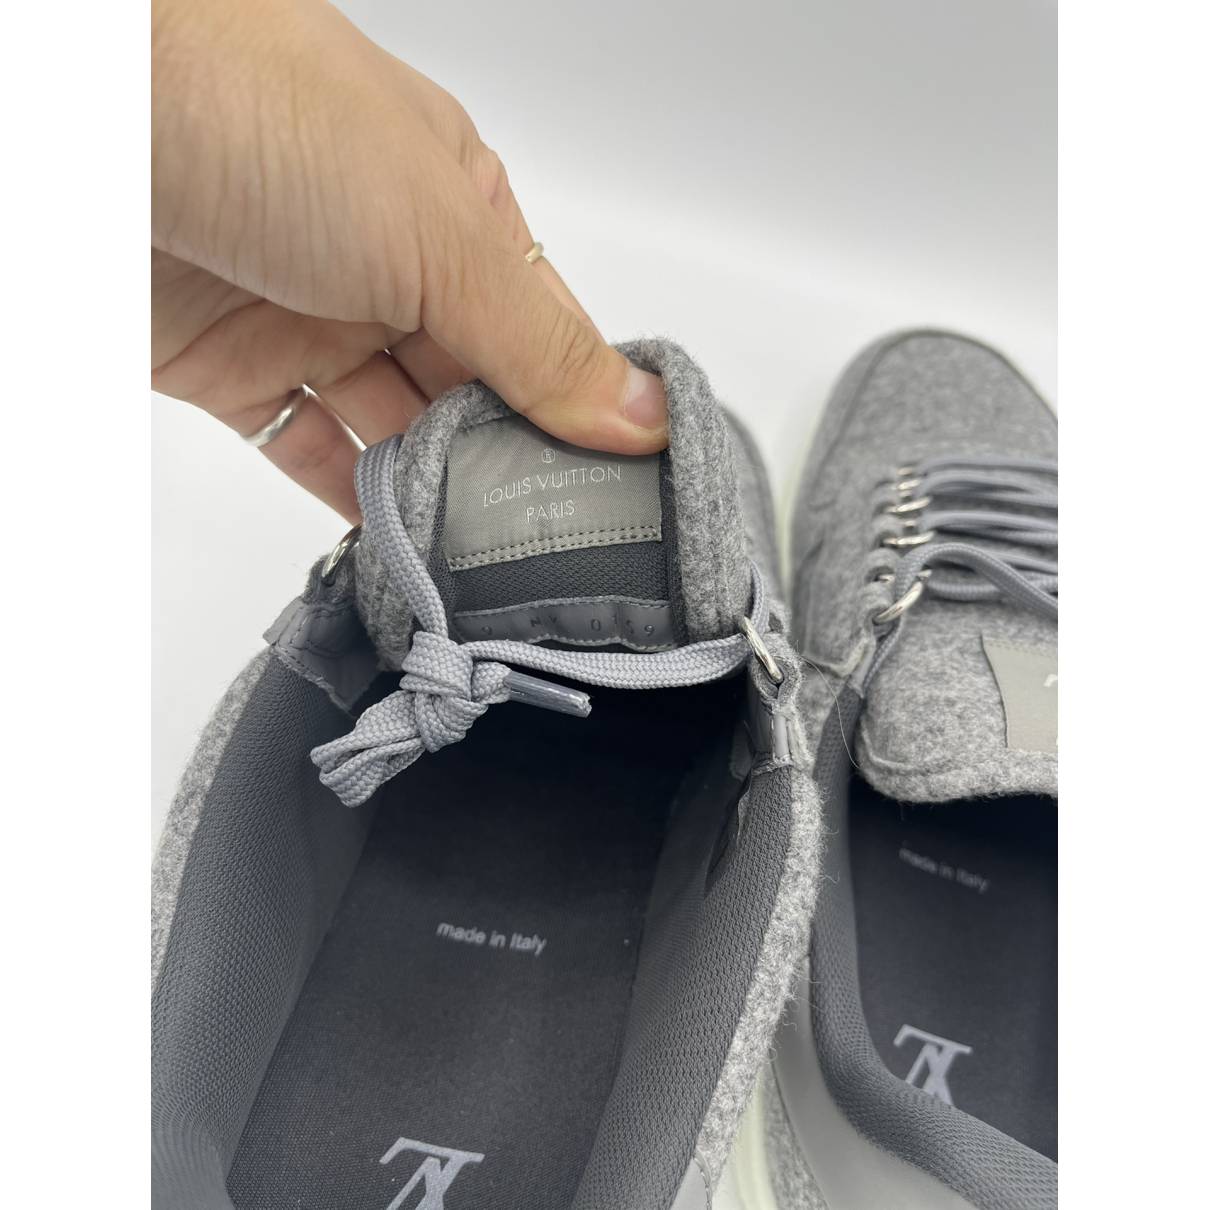 Lv trainer low trainers Louis Vuitton Grey size 10.5 US in Other